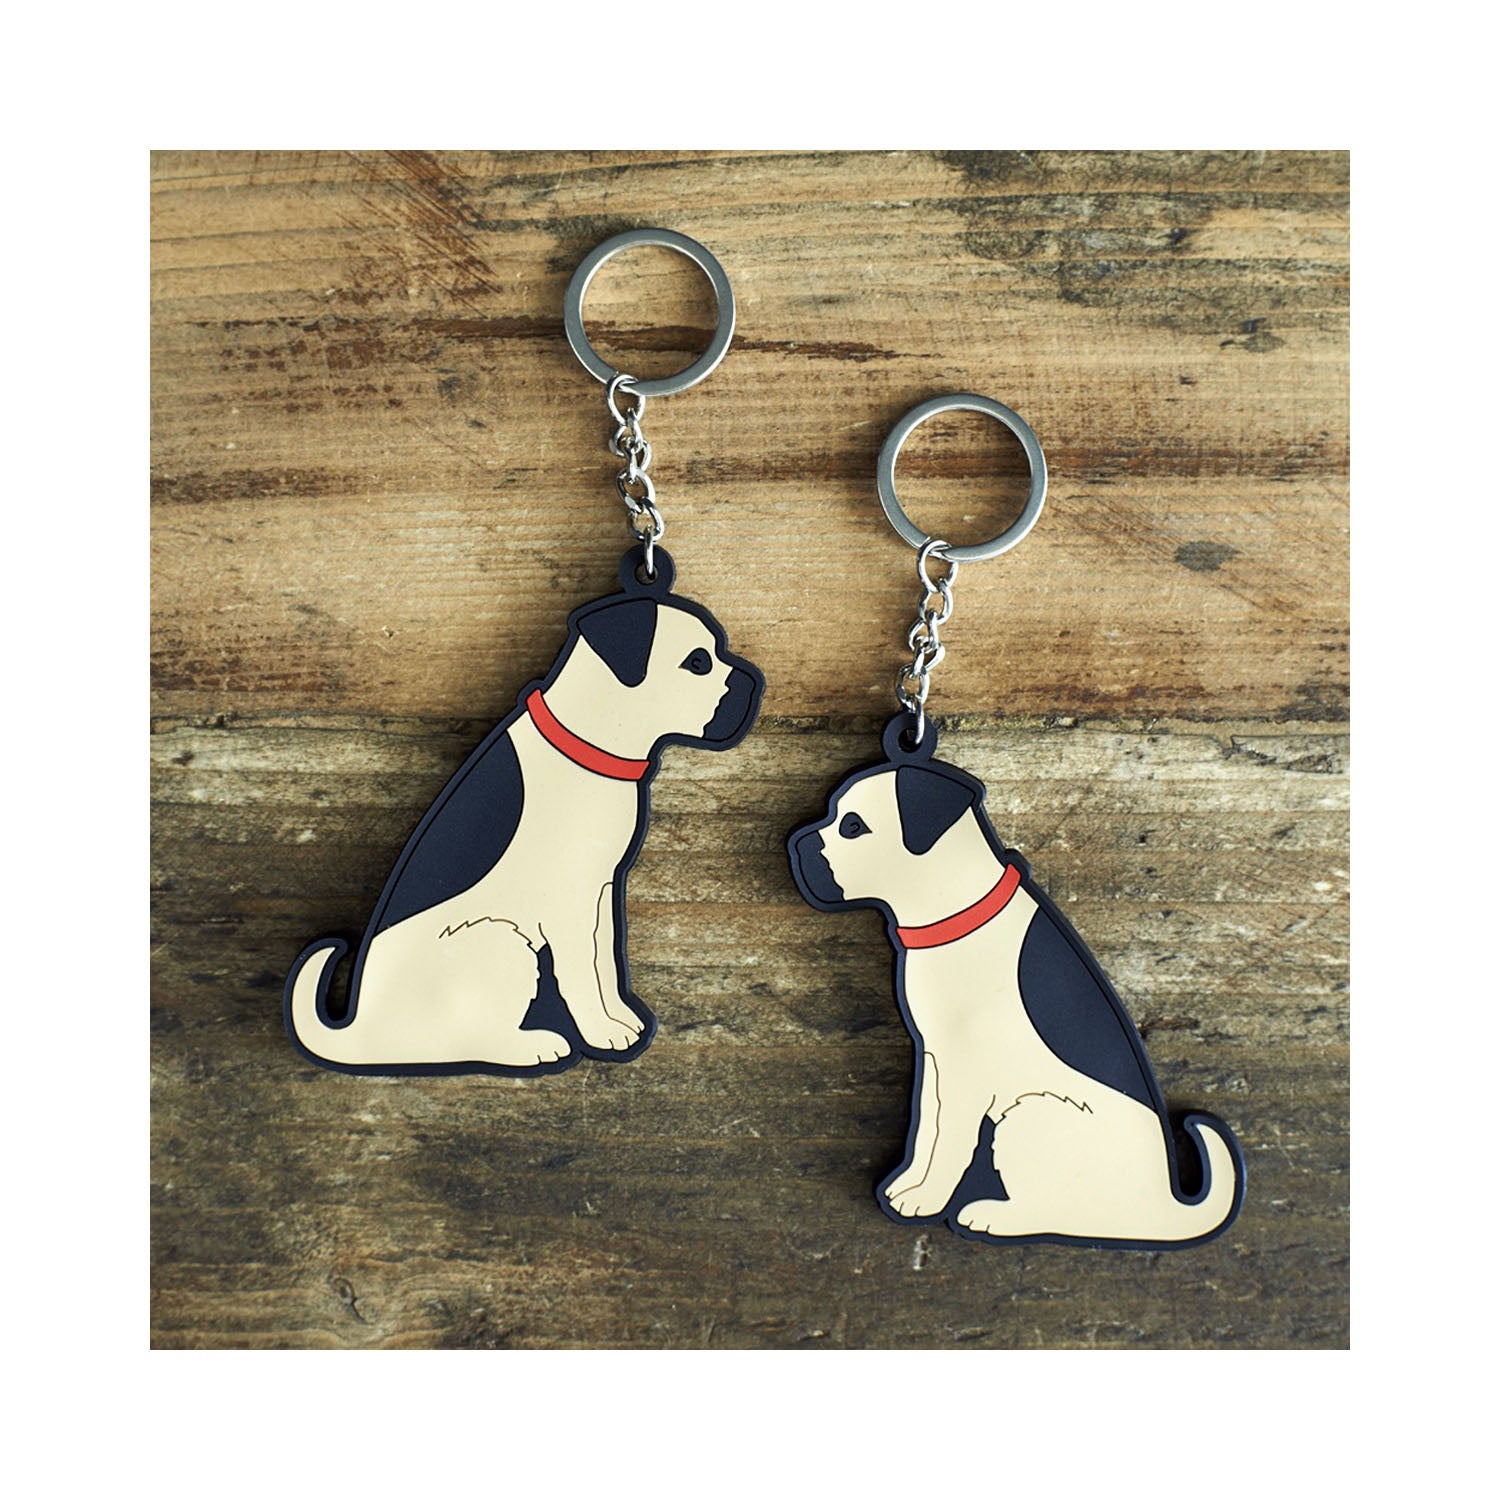 Dog Lover Gifts available at Dog Krazy Gifts - Bertie The Border Terrier Keyring - part of the Sweet William range of gifts for dog lovers available from Dog Krazy Gifts